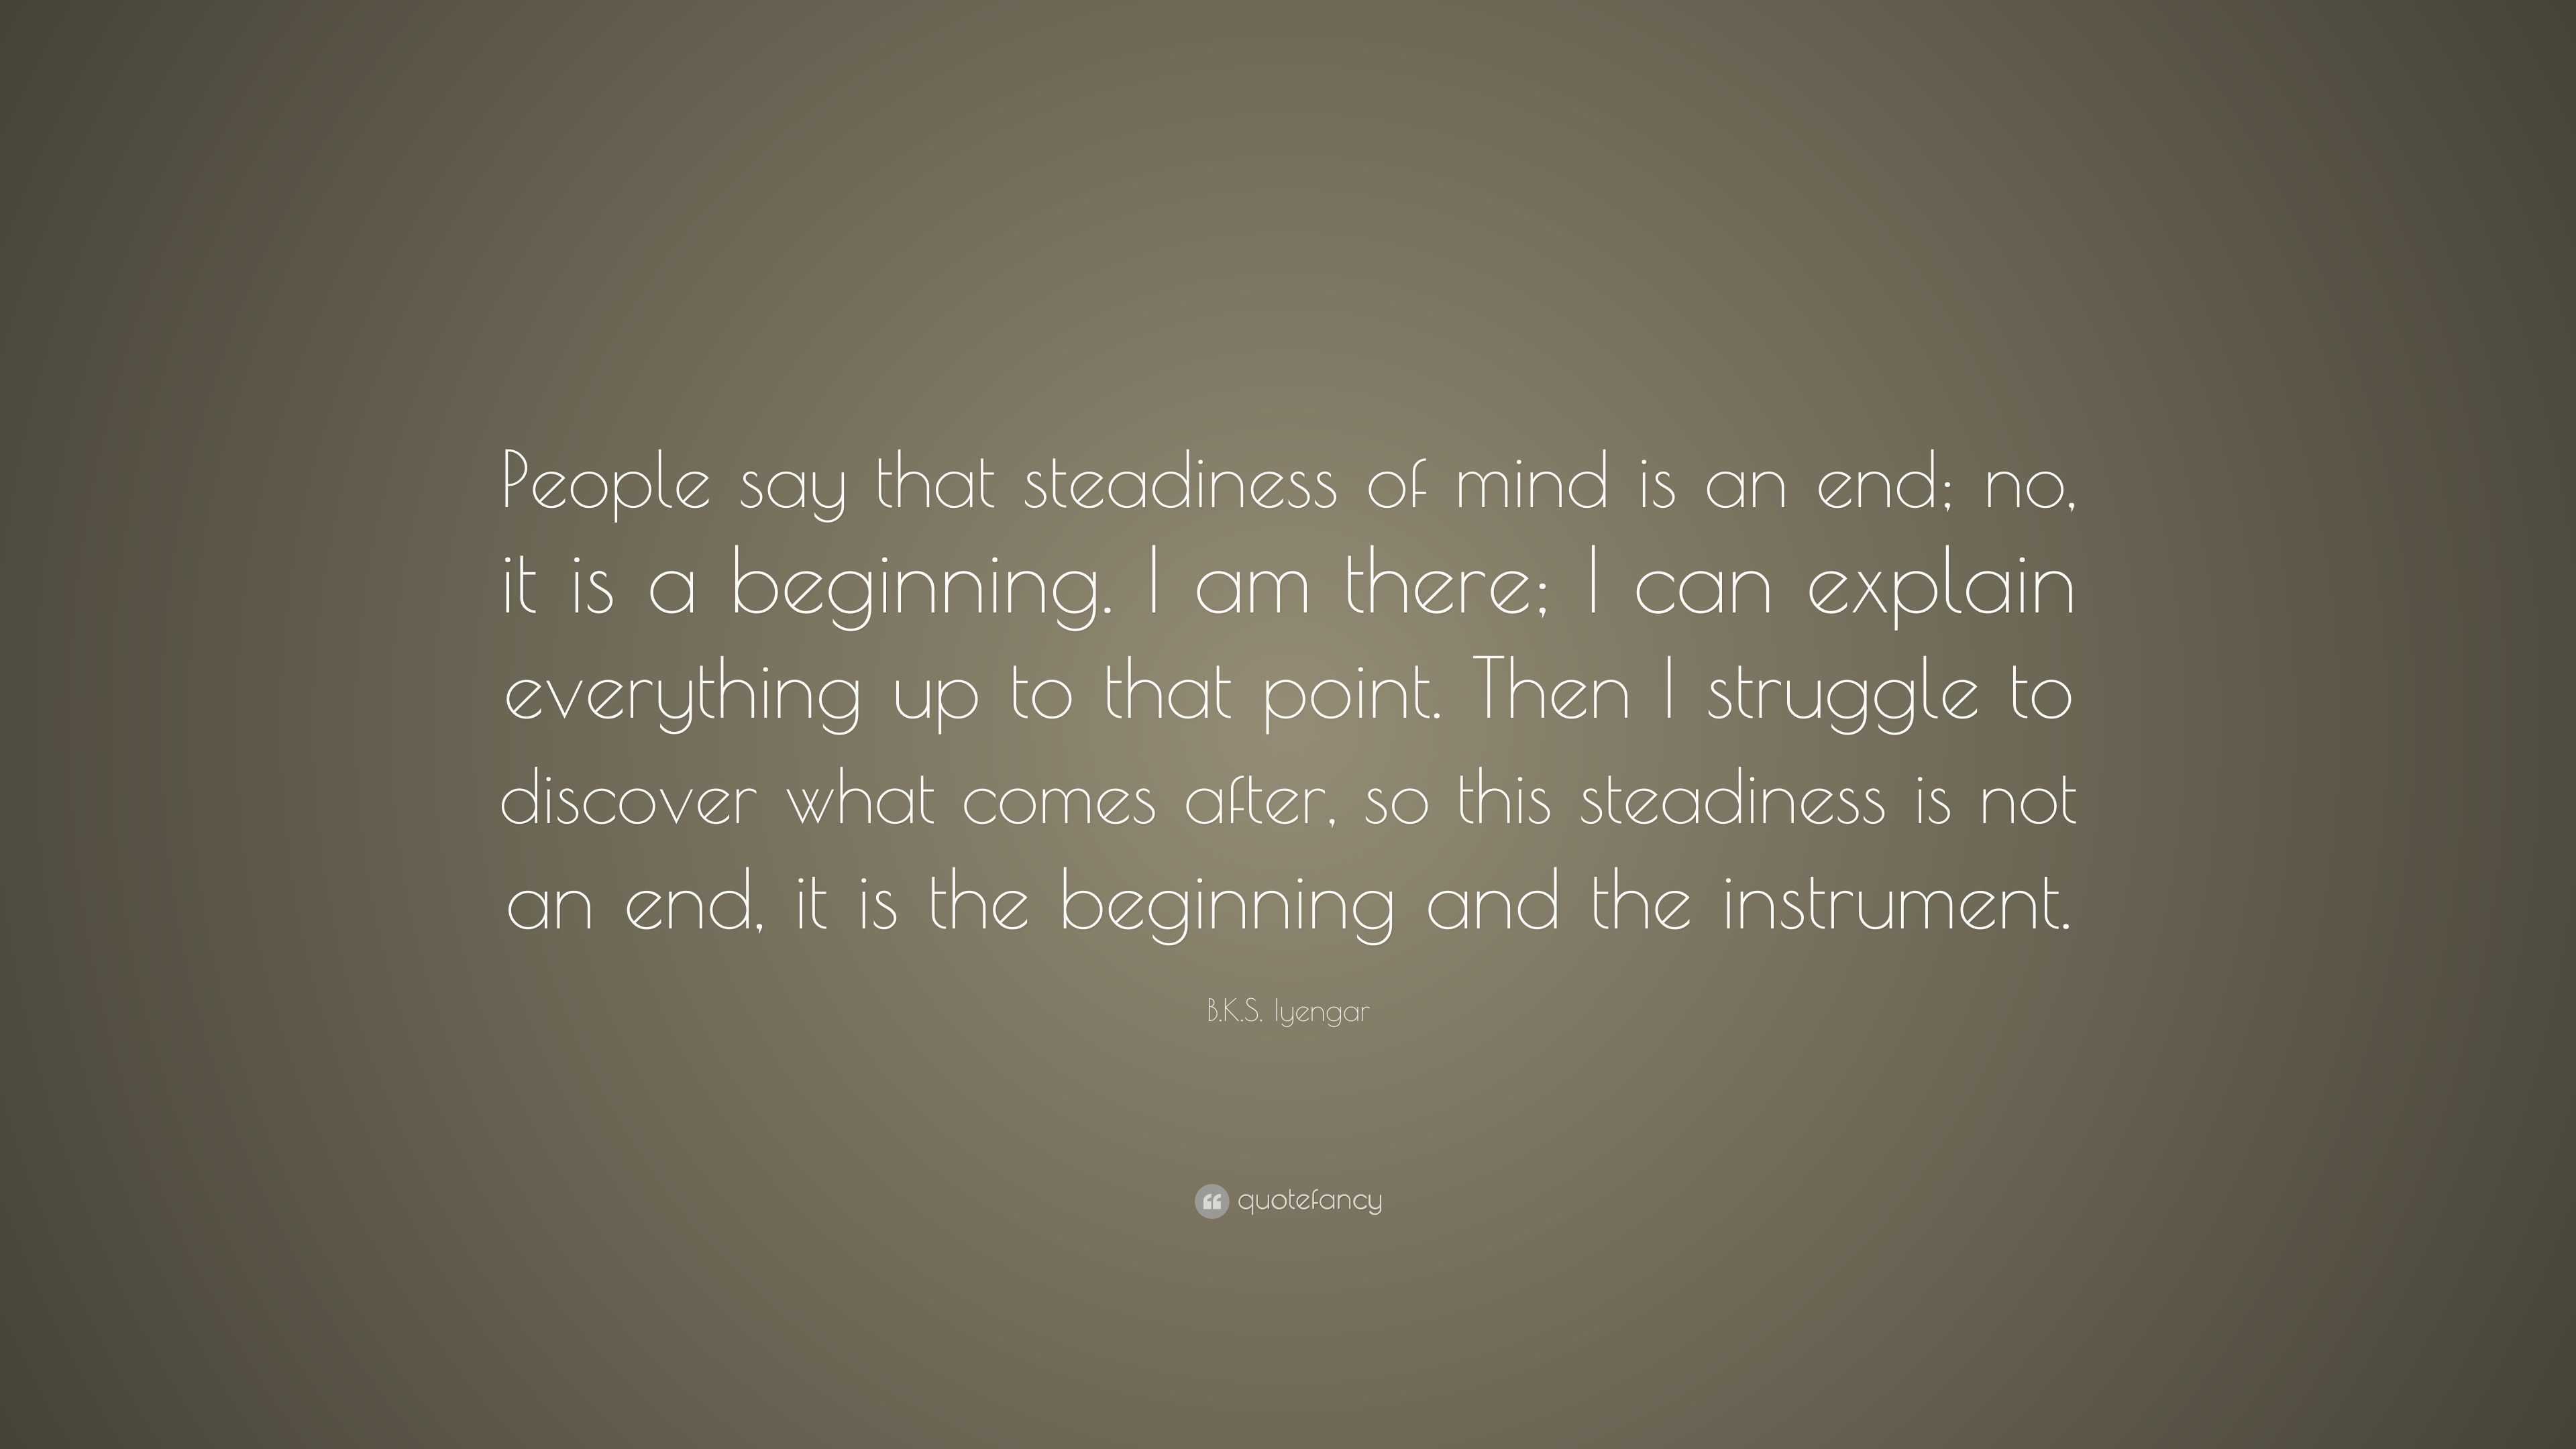 B.K.S. Iyengar Quote: “People say that steadiness of mind is an end; no ...